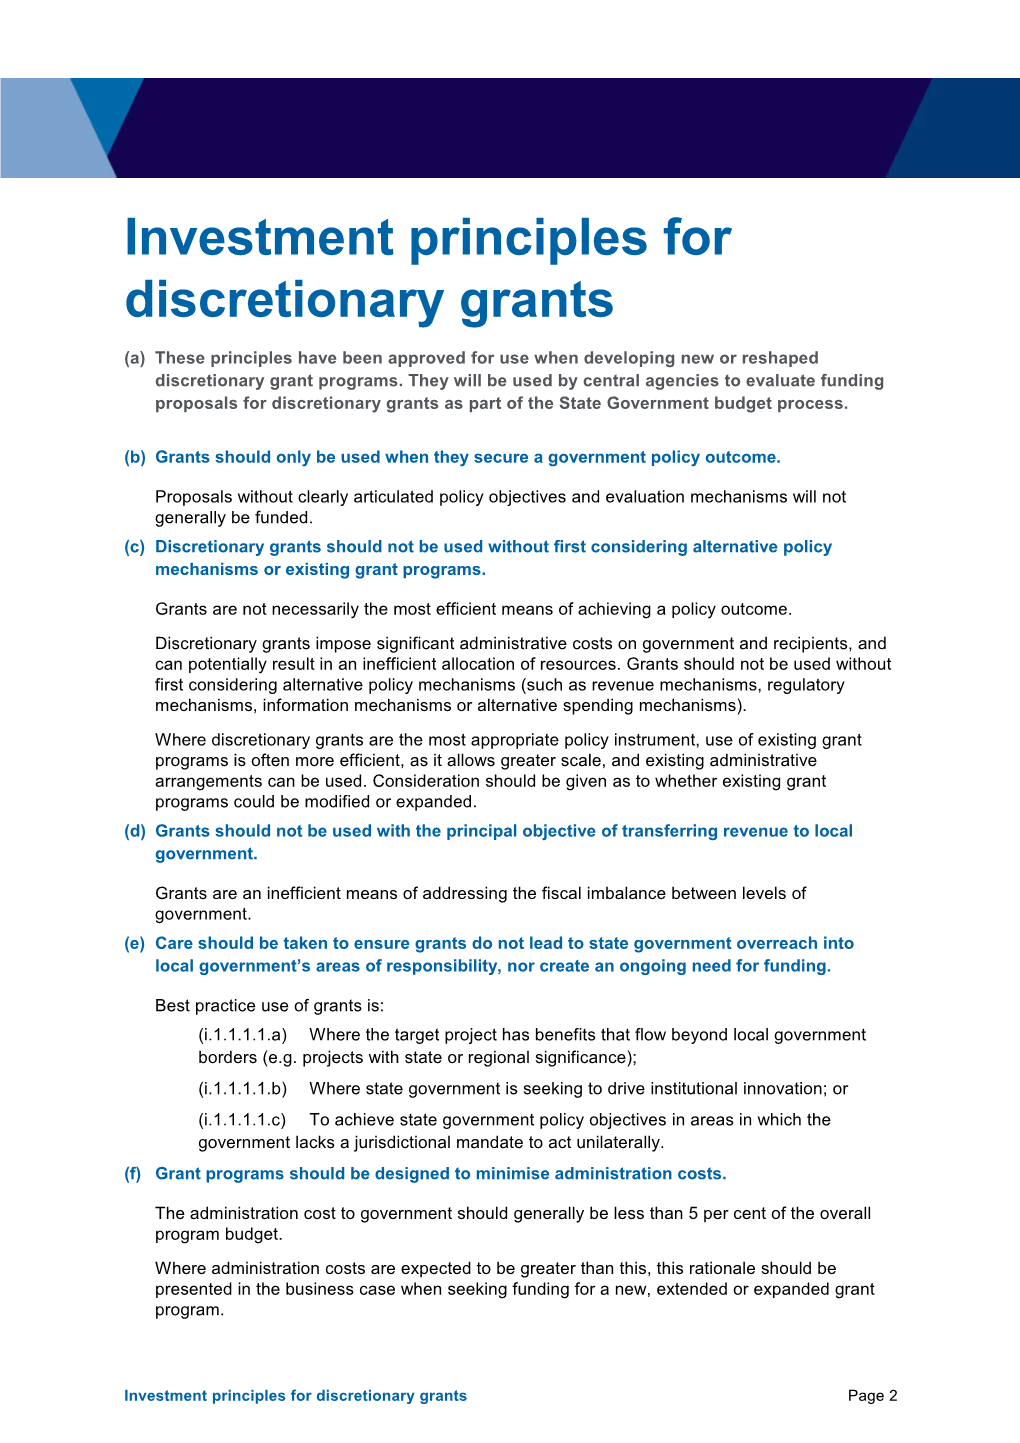 Investment Principles for Discretionary Grants